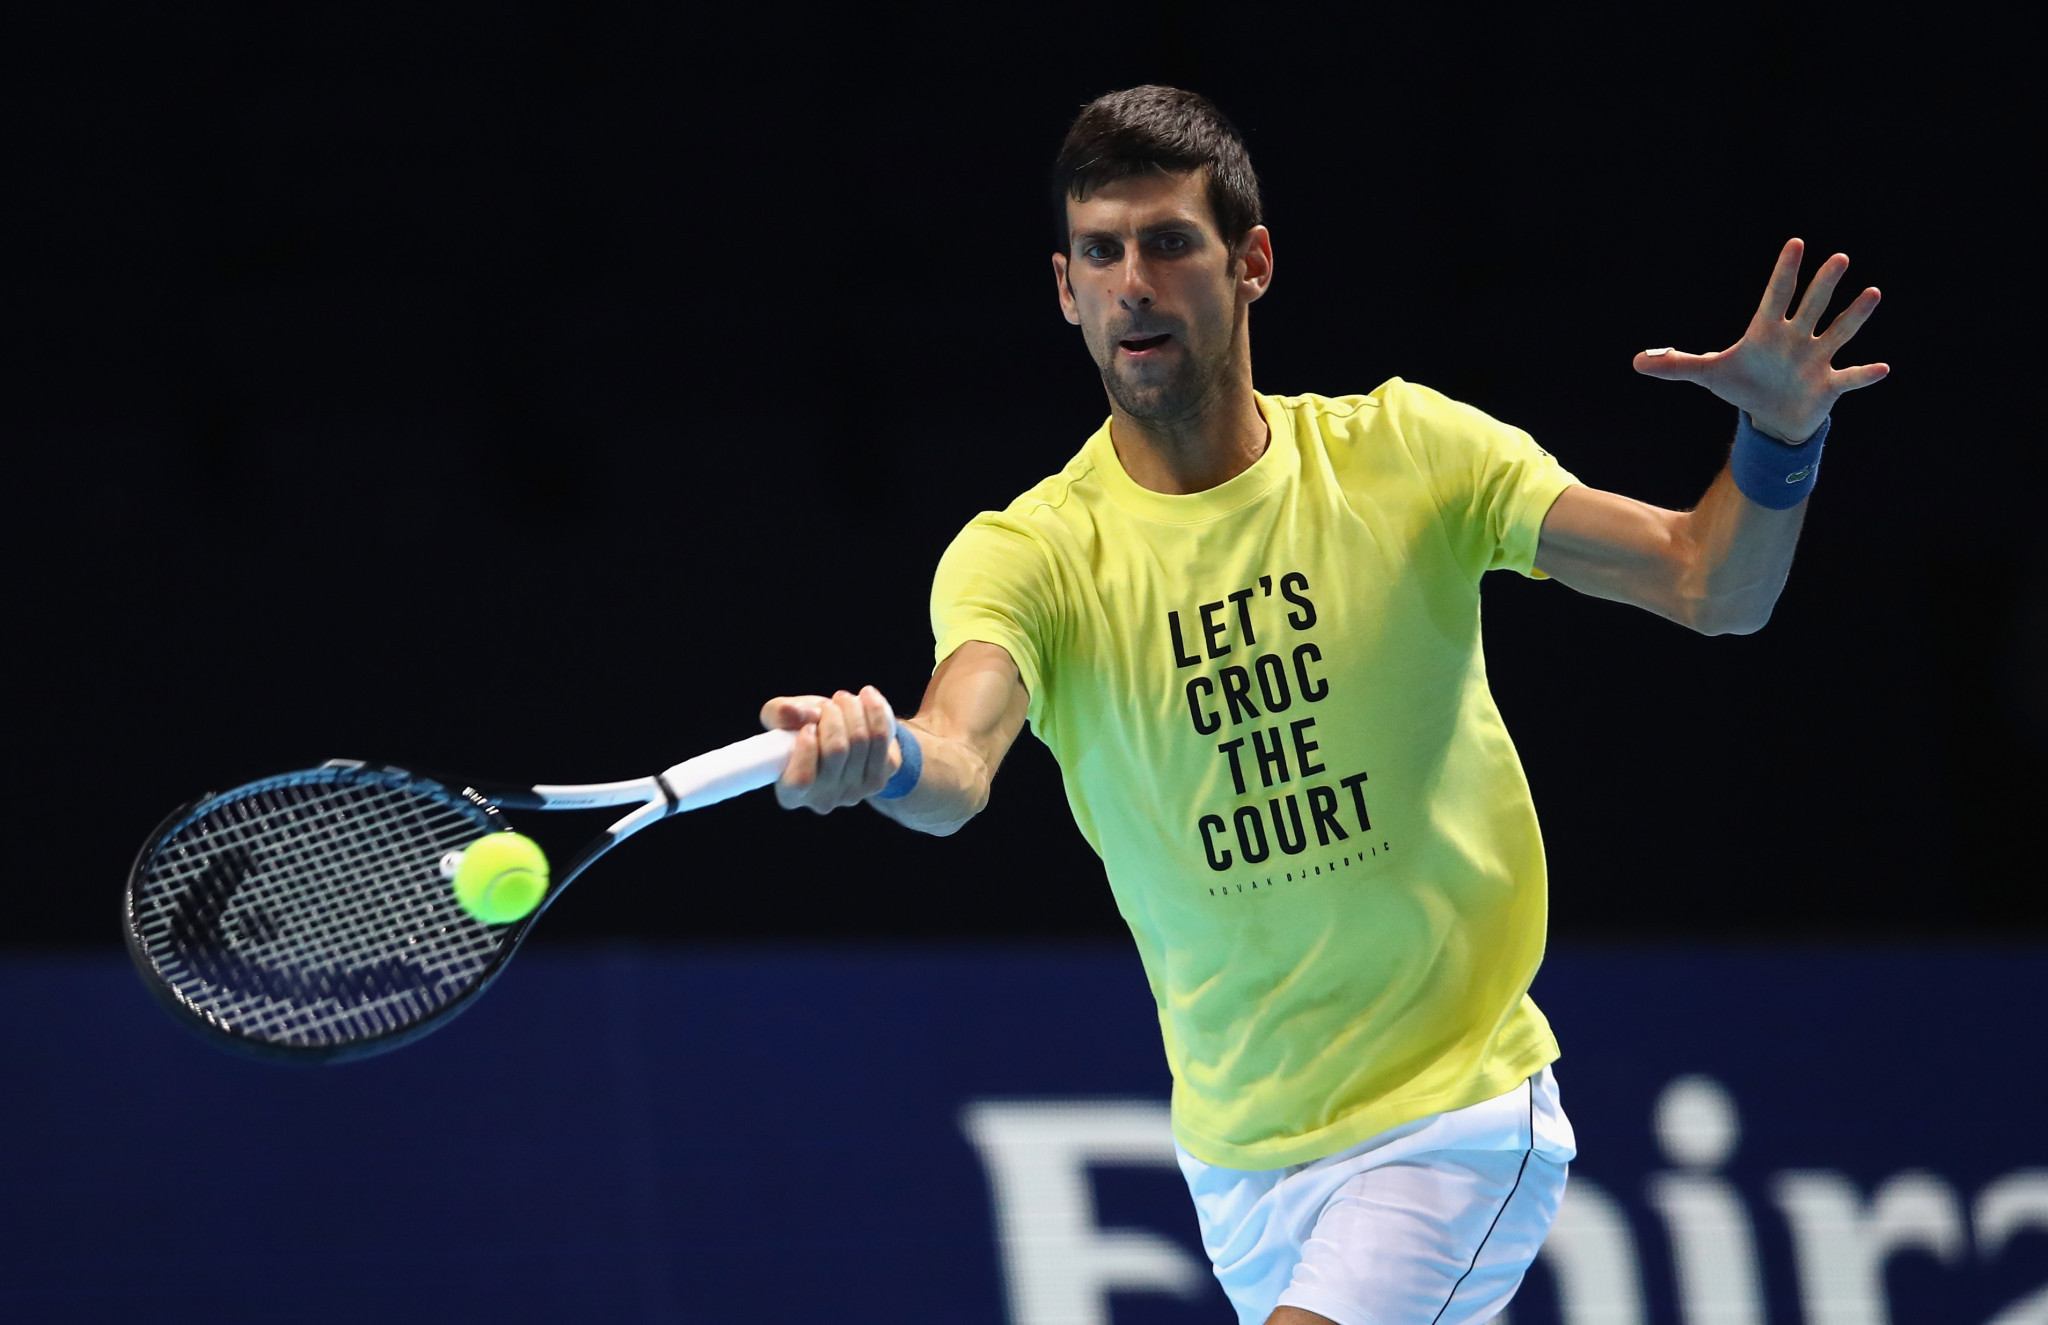 World number one Djokovic bids for sixth ATP Finals title